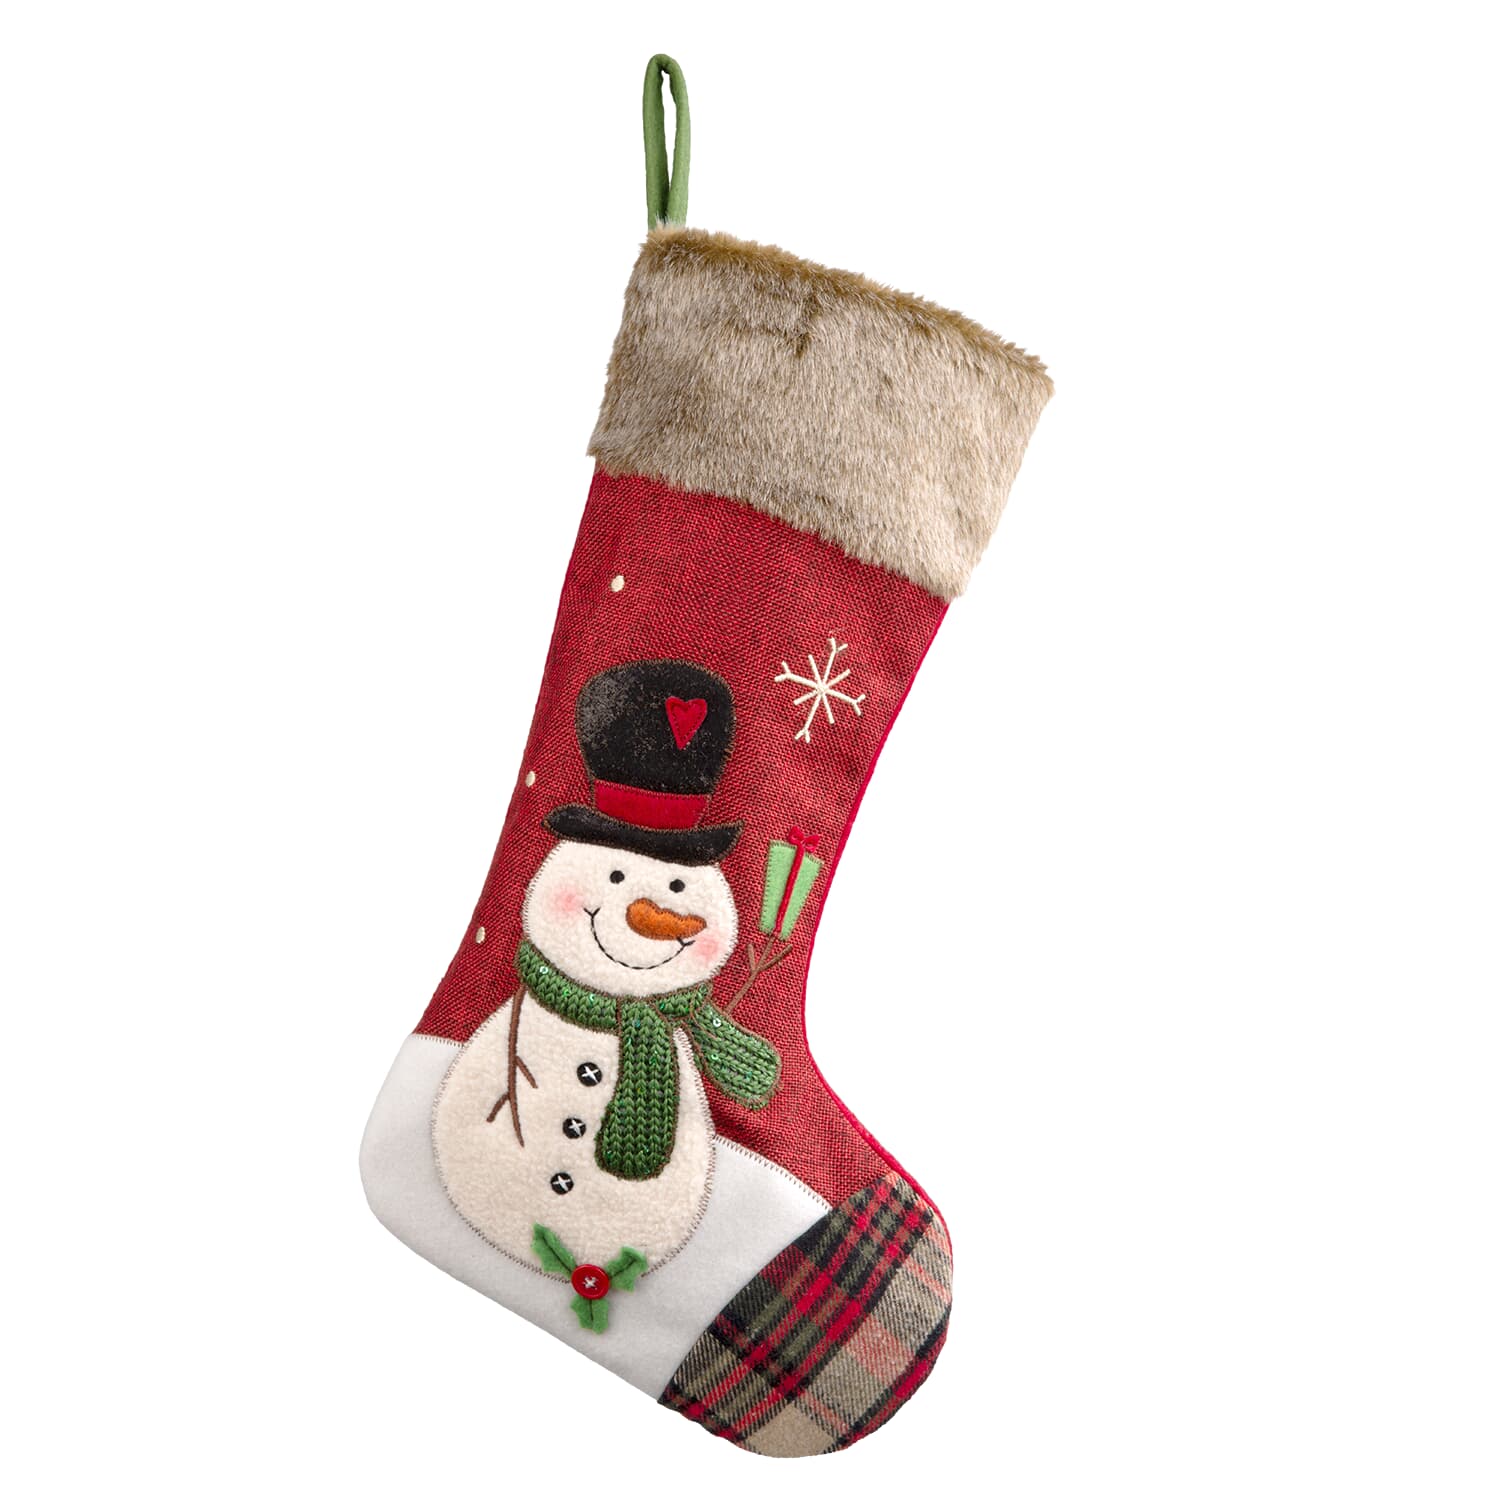 Snowman Stocking, red